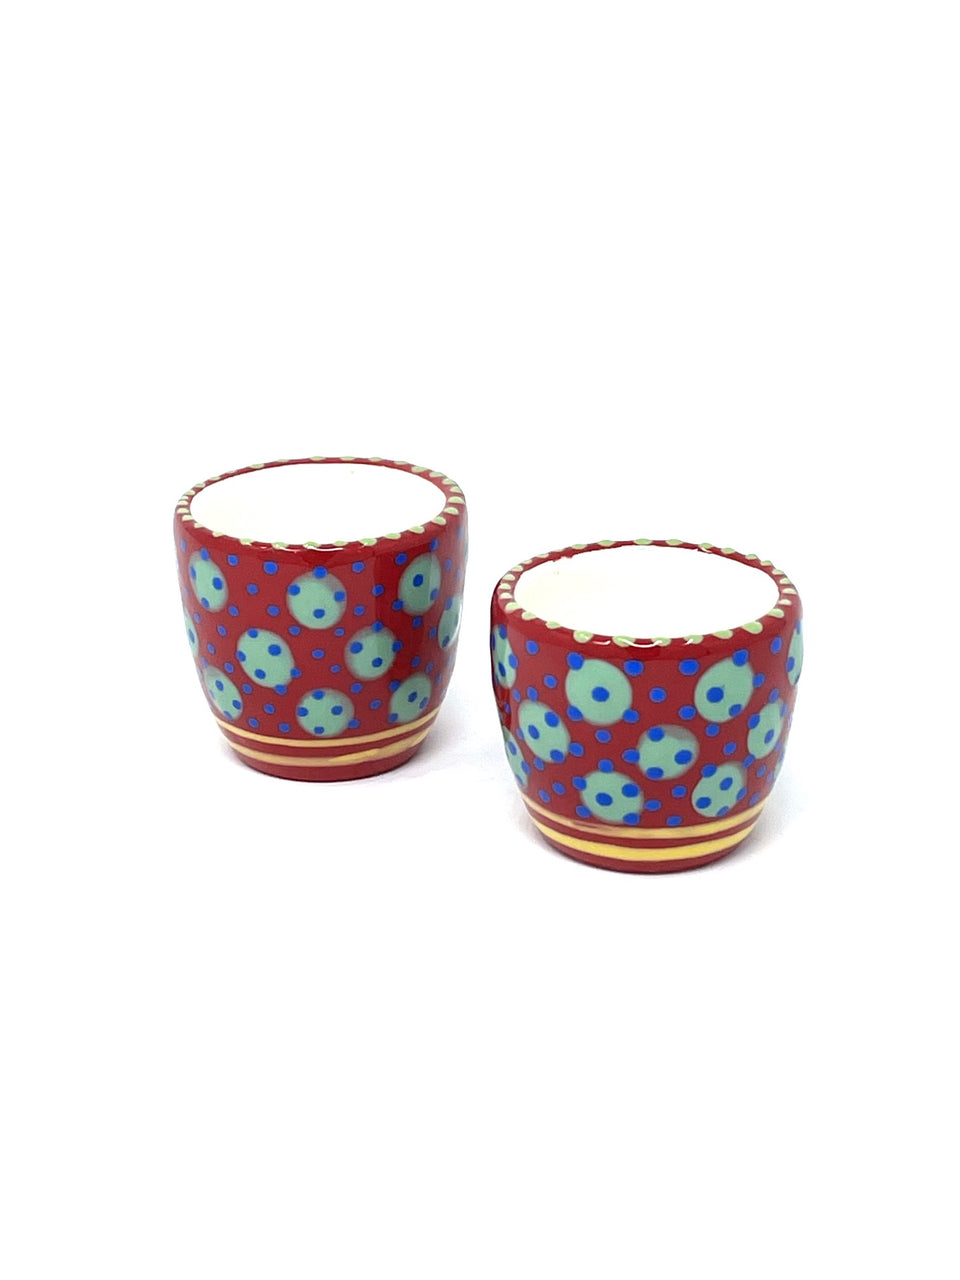 Potters Everyday Egg Cups (Set of 2)